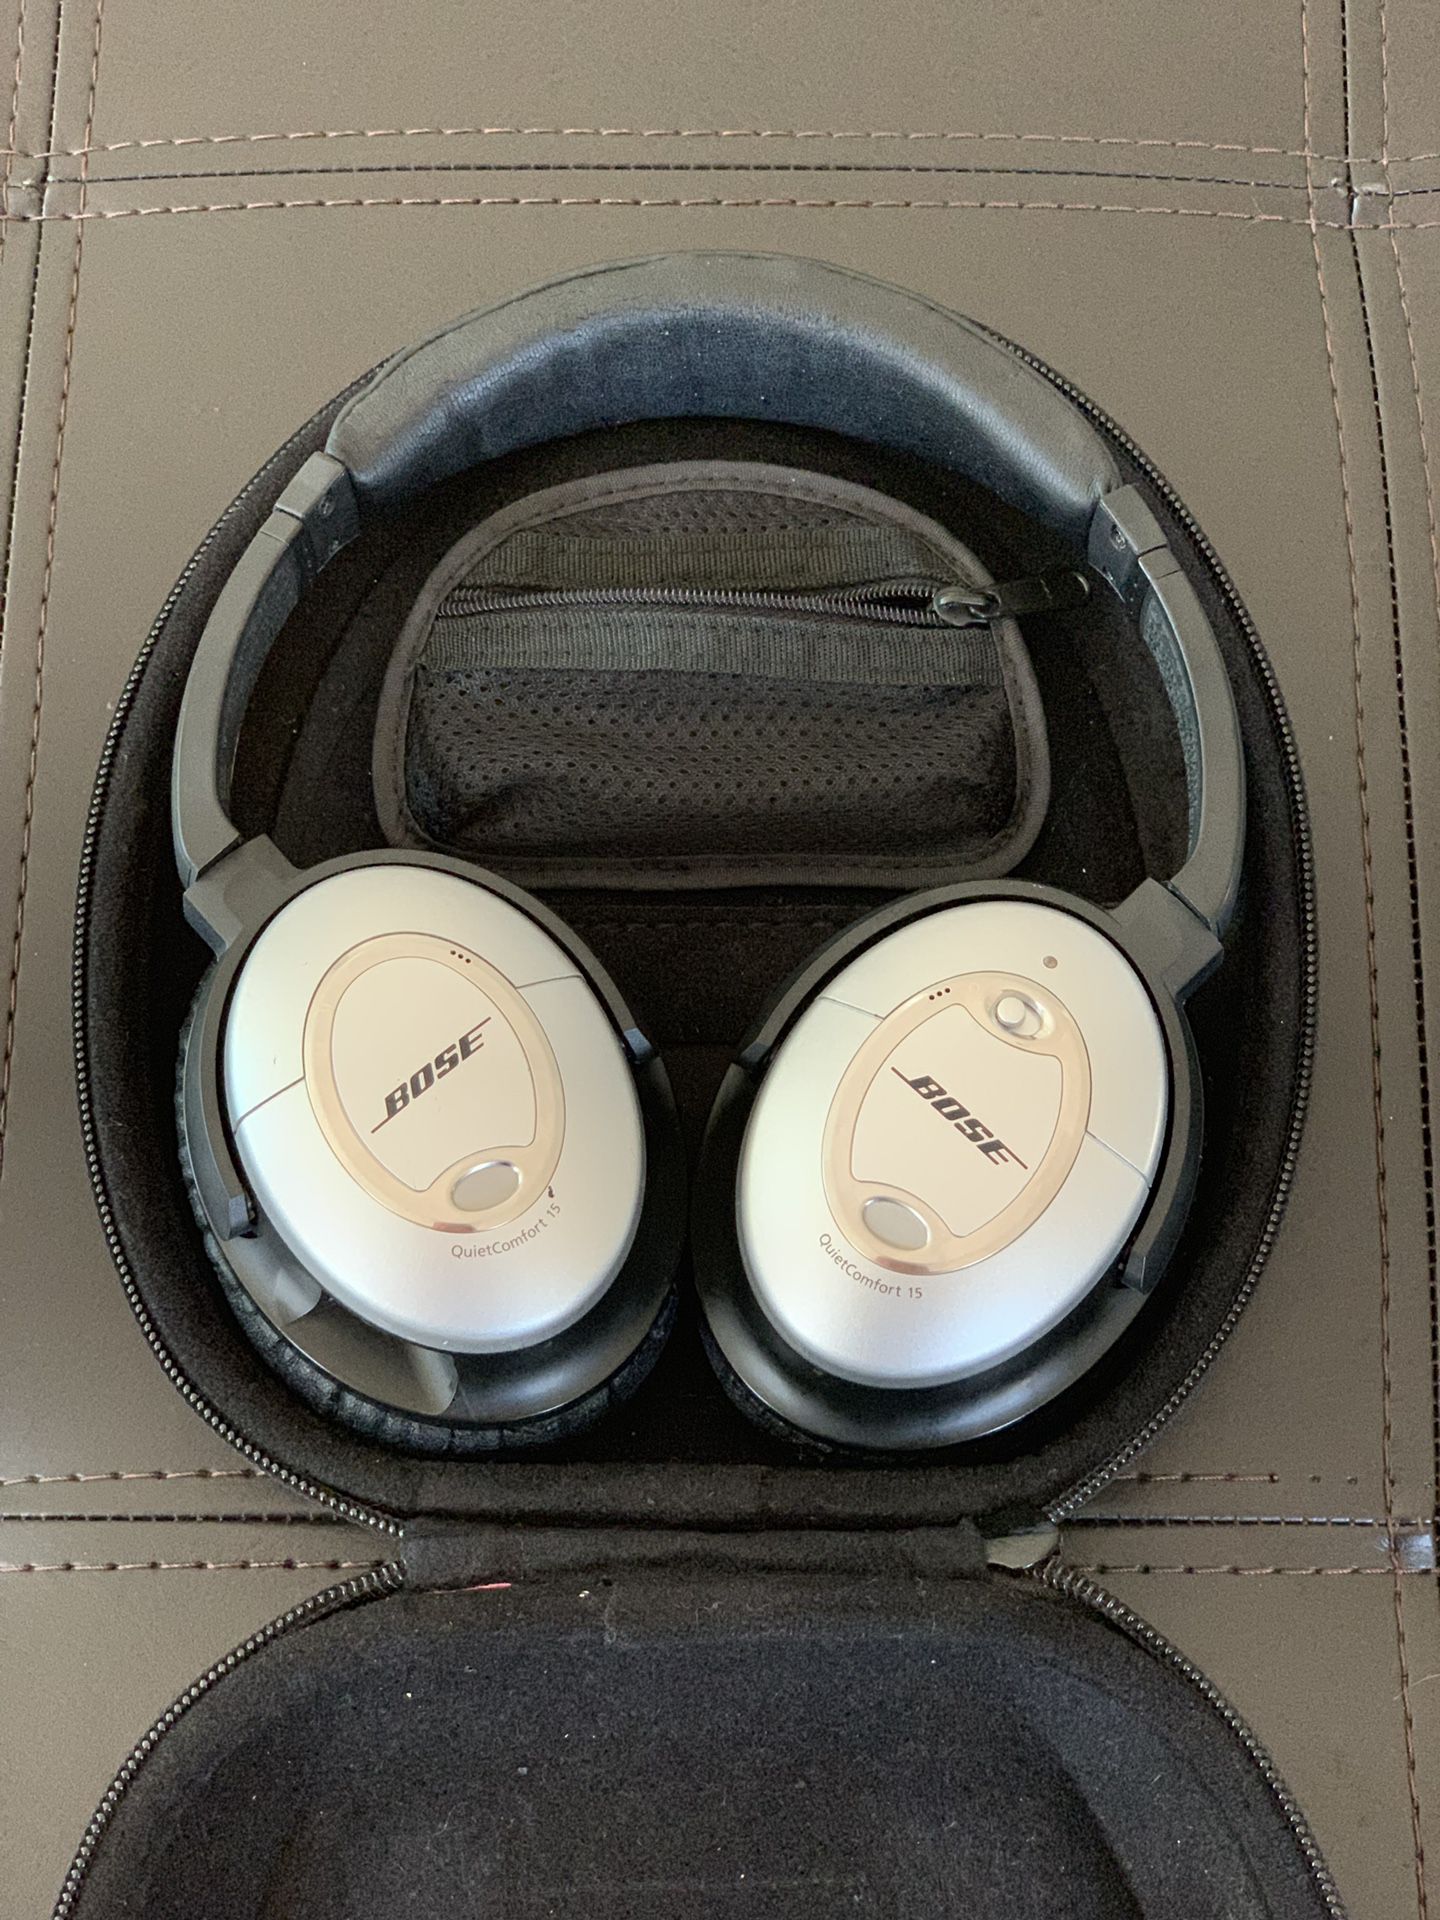 Bose QC15 Wired headphones